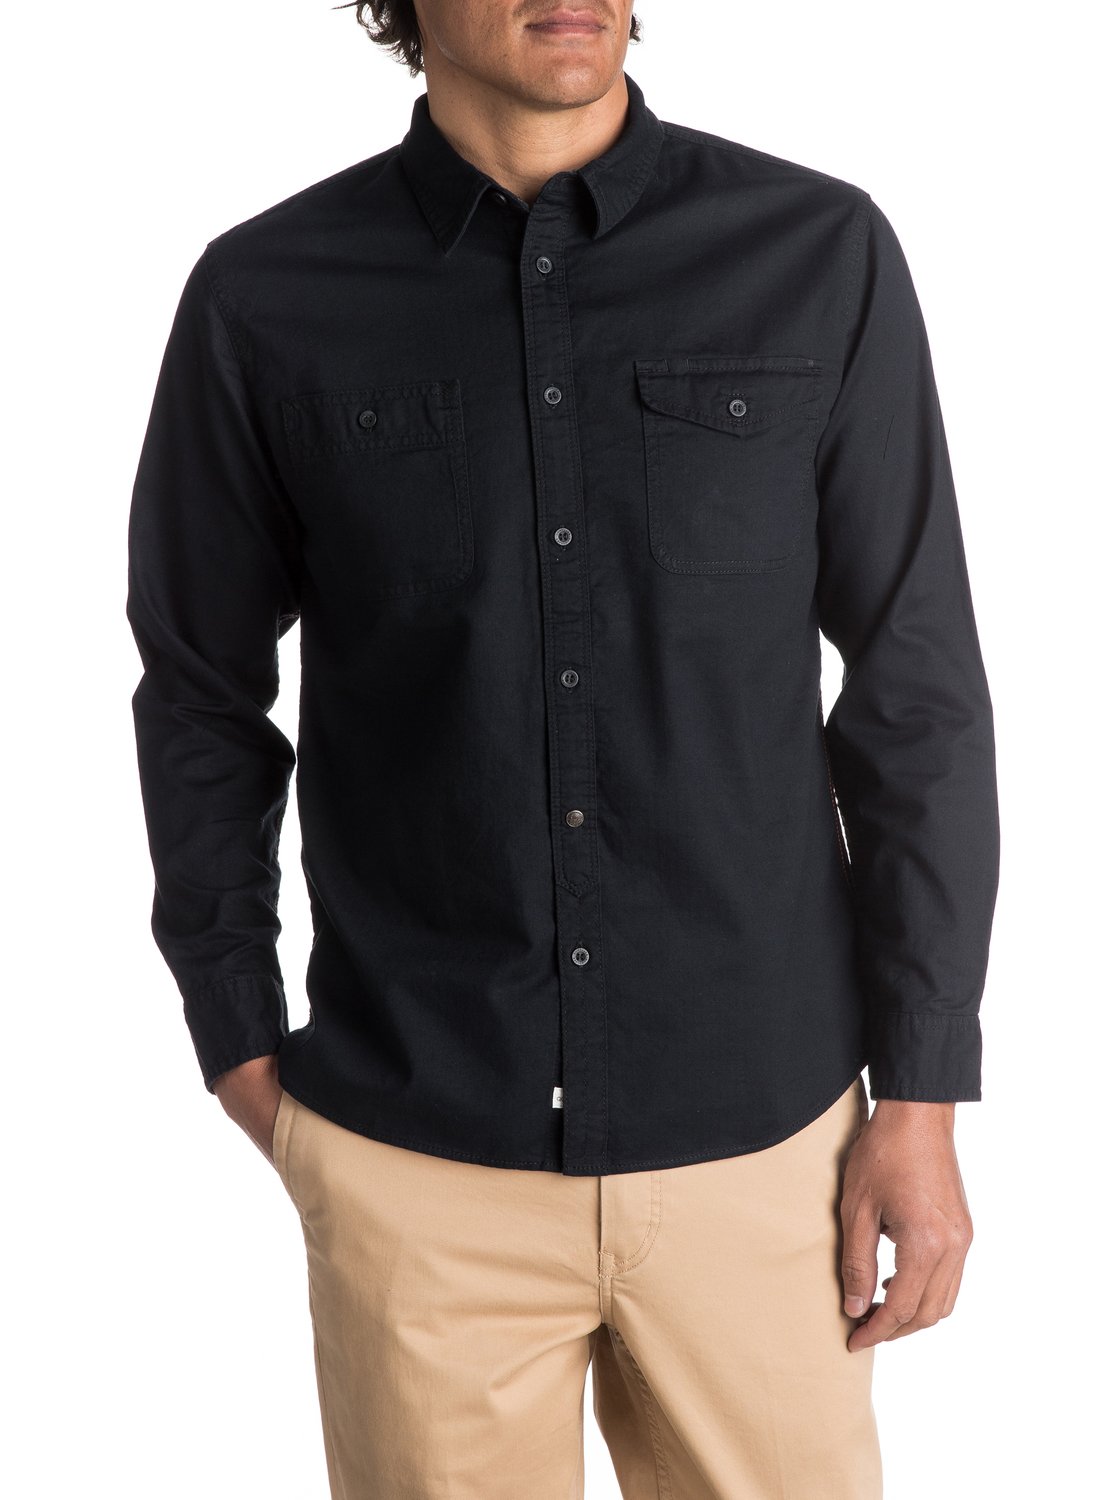 Waterman Tarno - Chemise a manches longues pour Homme - Quiksilver